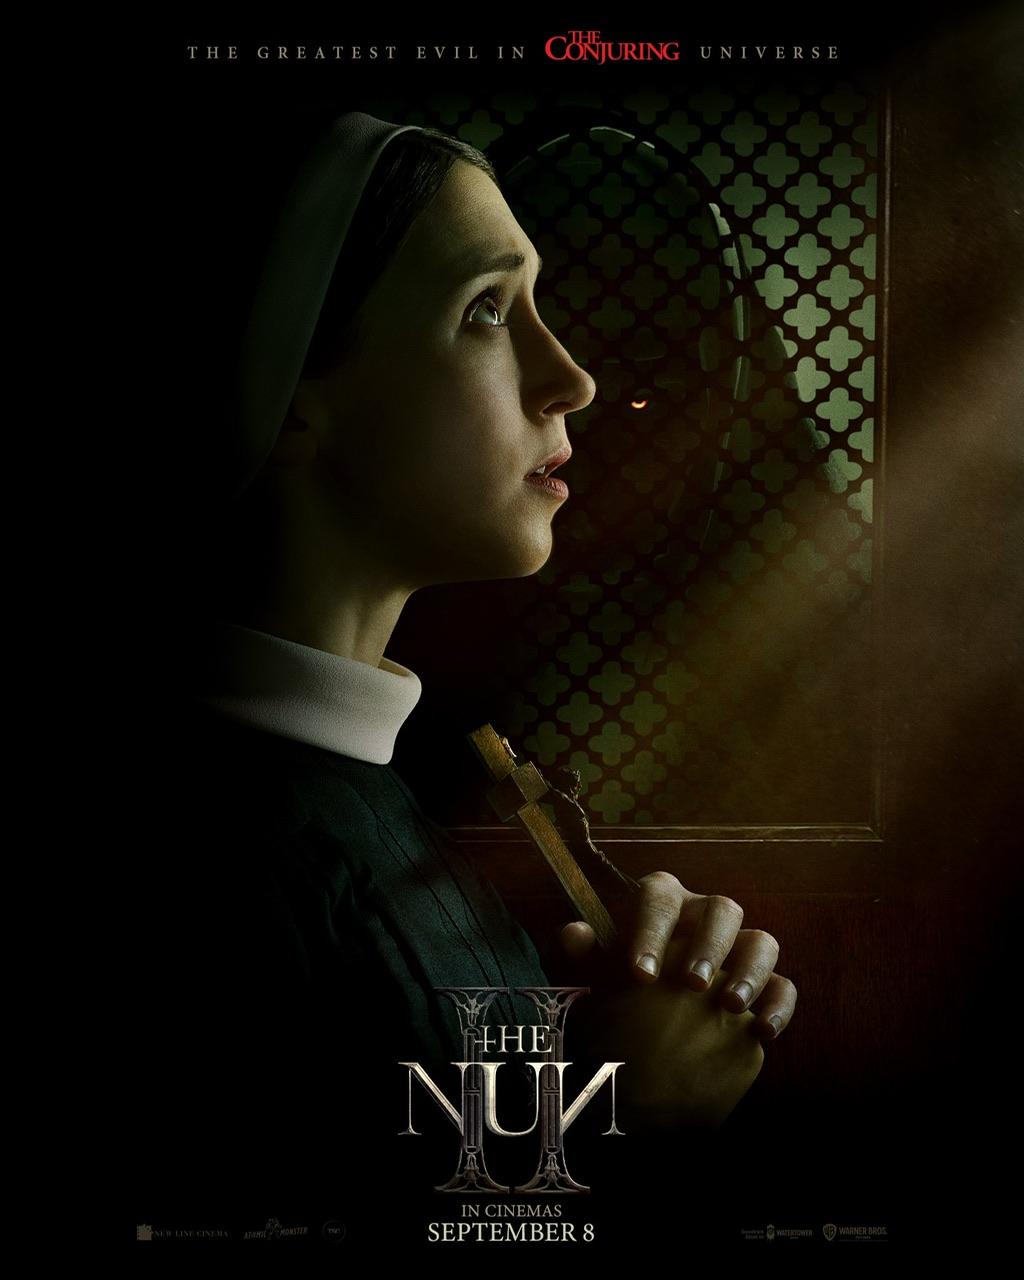 The Nun 2 (September 7): The Nun 2 is certain to give a fascinating encounter with its terrible thrills and intriguing occult enigmas that will undoubtedly pique your interest.